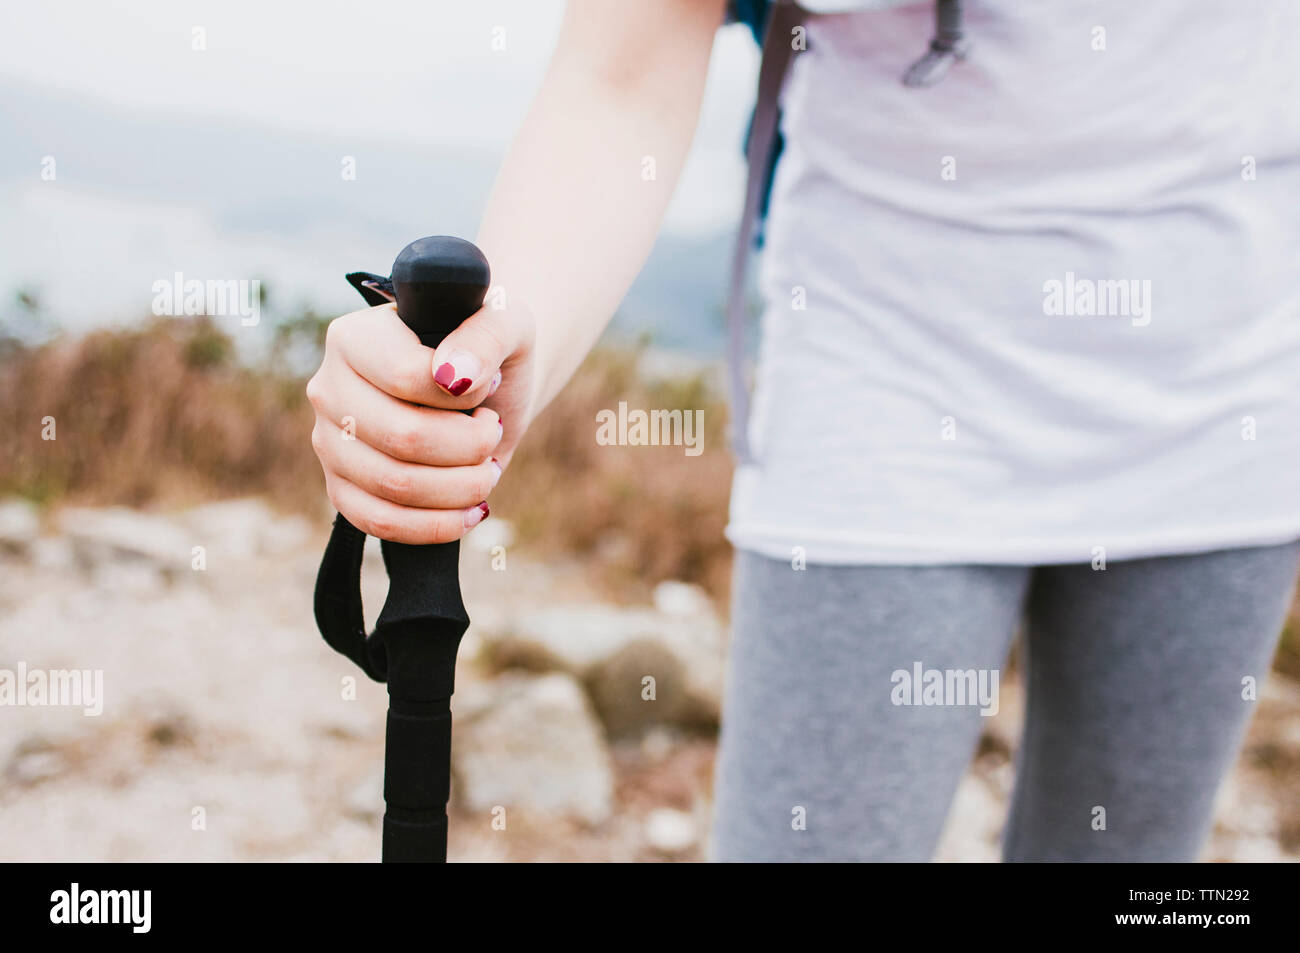 Midsection of female hiker holding hiking pole while standing on mountain Stock Photo